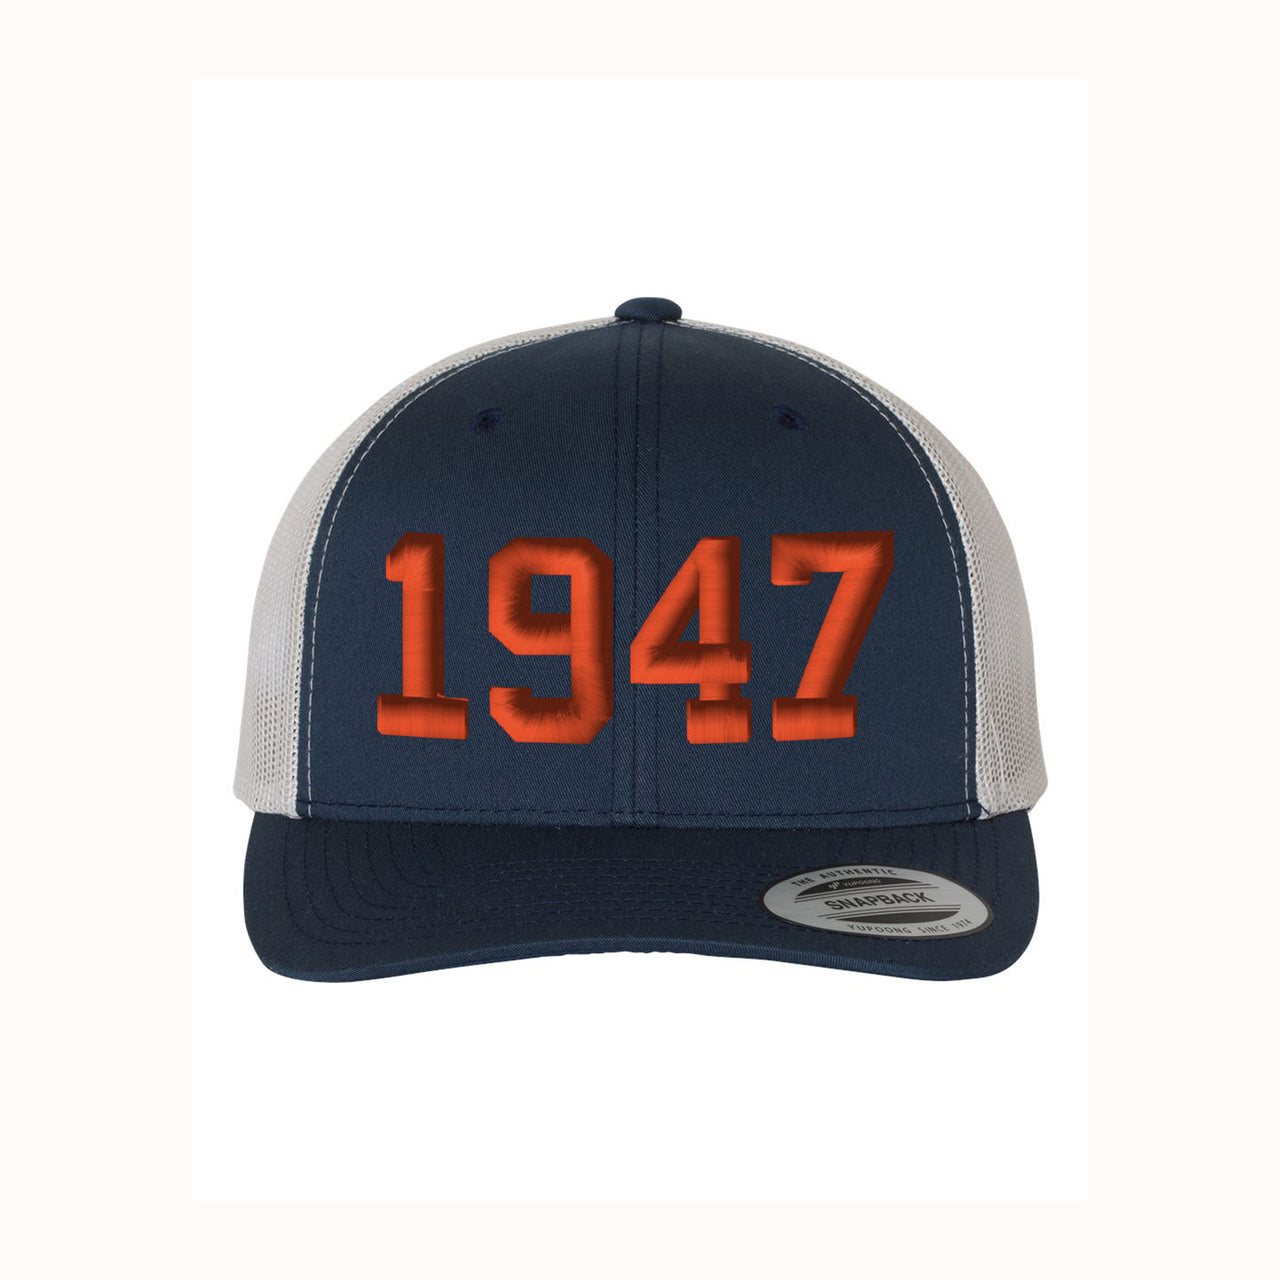 Personalized Number Adult Trucker Cap